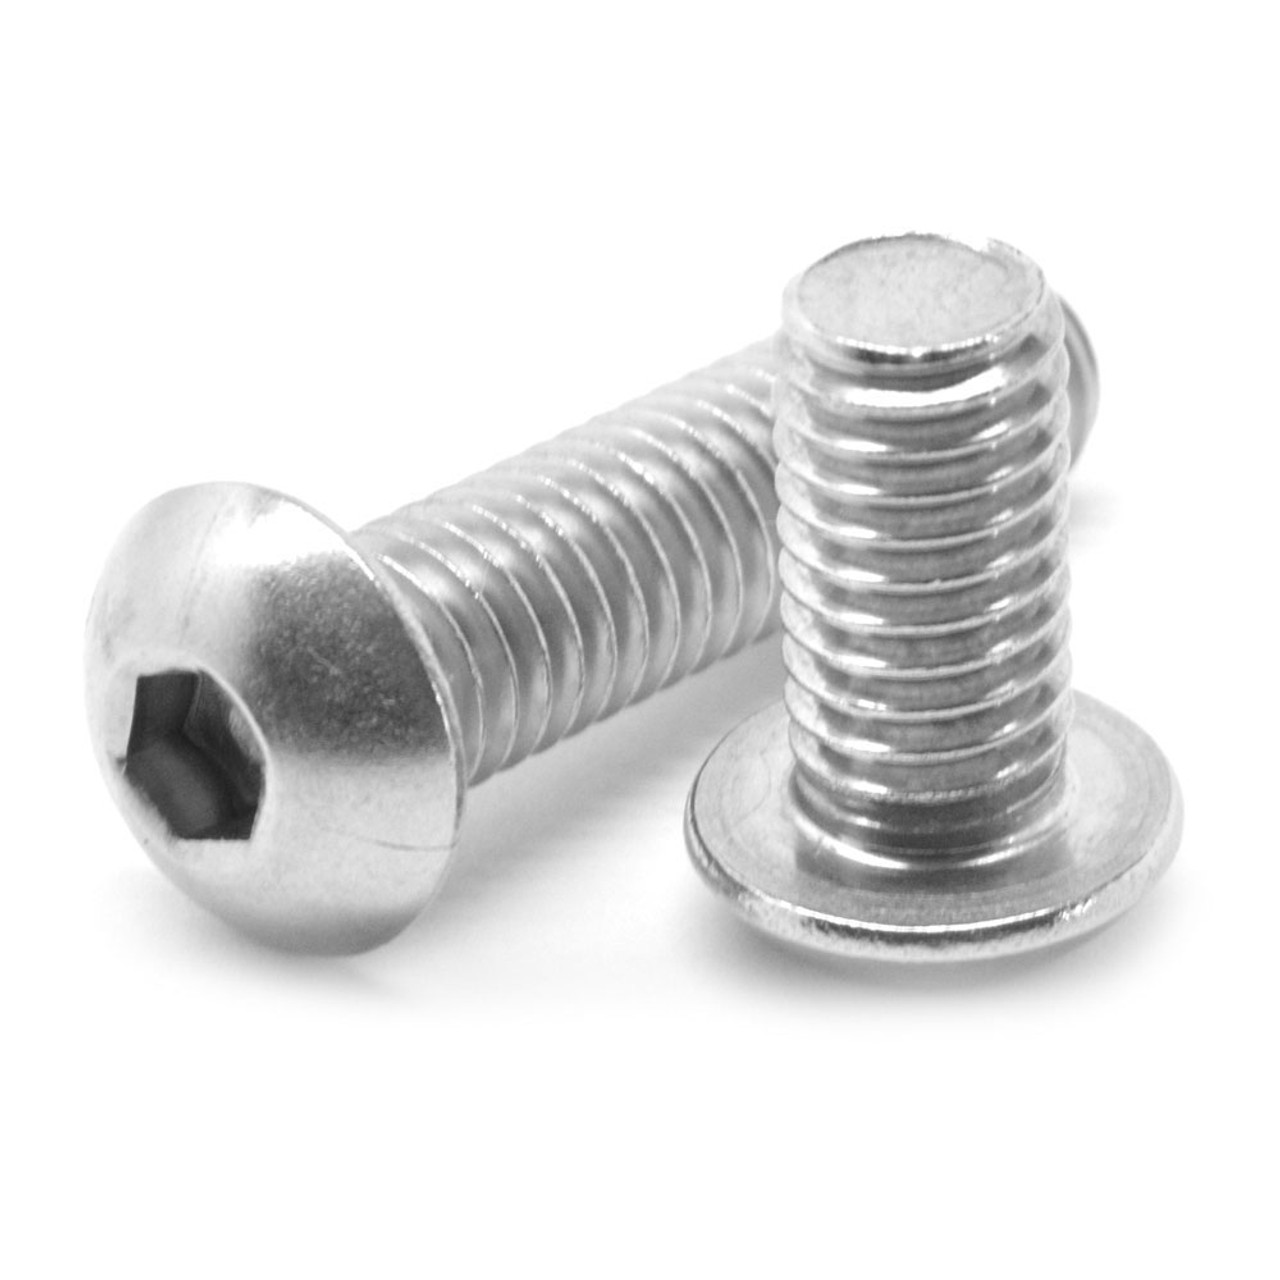 M4 x 0.70 x 14 MM (FT) Coarse Thread ISO 7380 Socket Button Head Cap Screw Stainless Steel 18-8